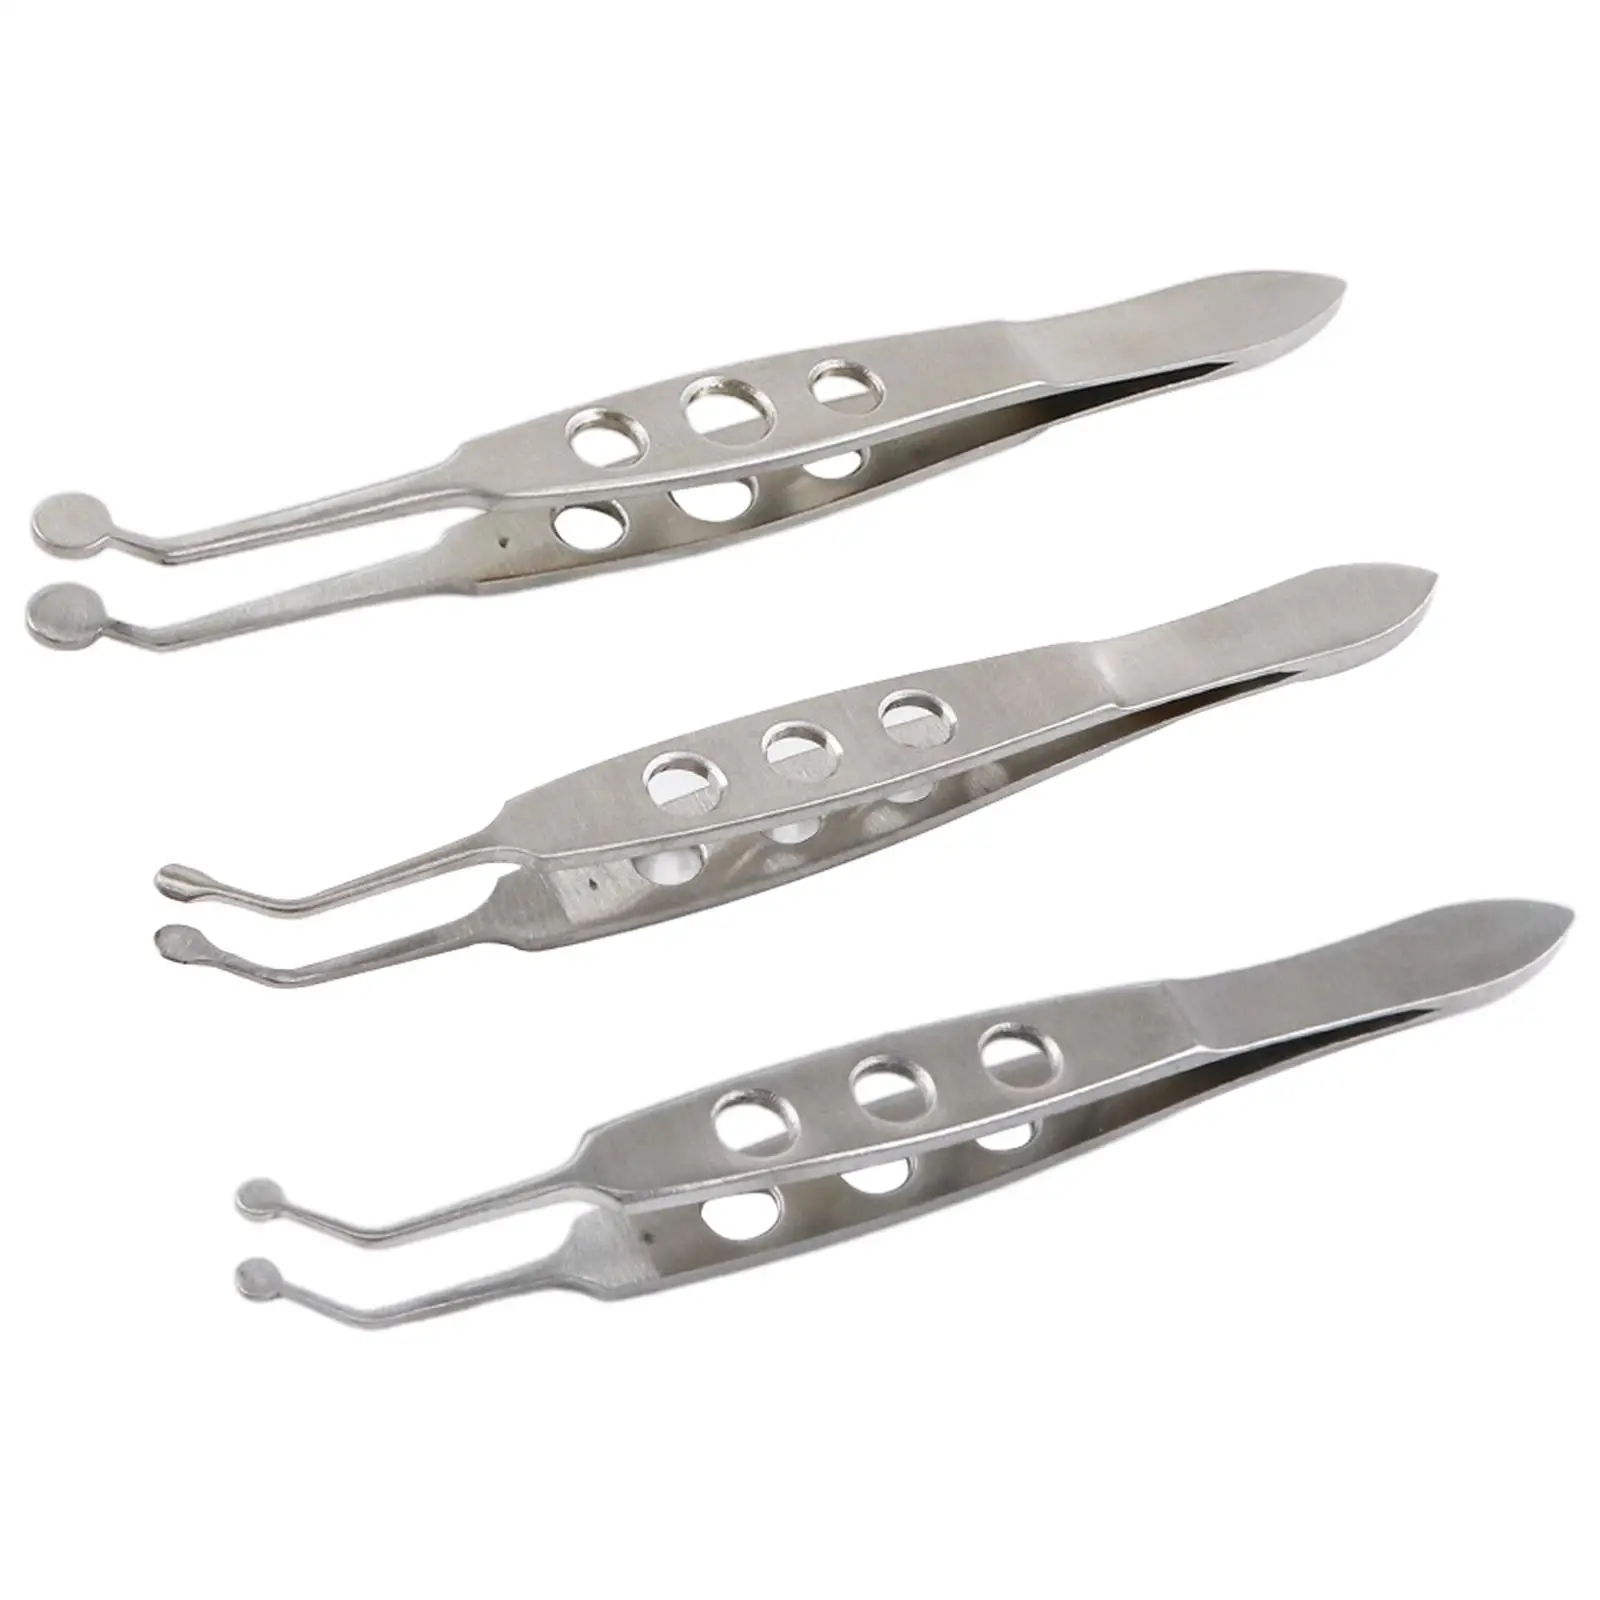 Meibomian Gland Expressor Forceps Ophthalmic Eye Tool High Precision Tweezer Clip Tools for Eyelid Meibomian Flap